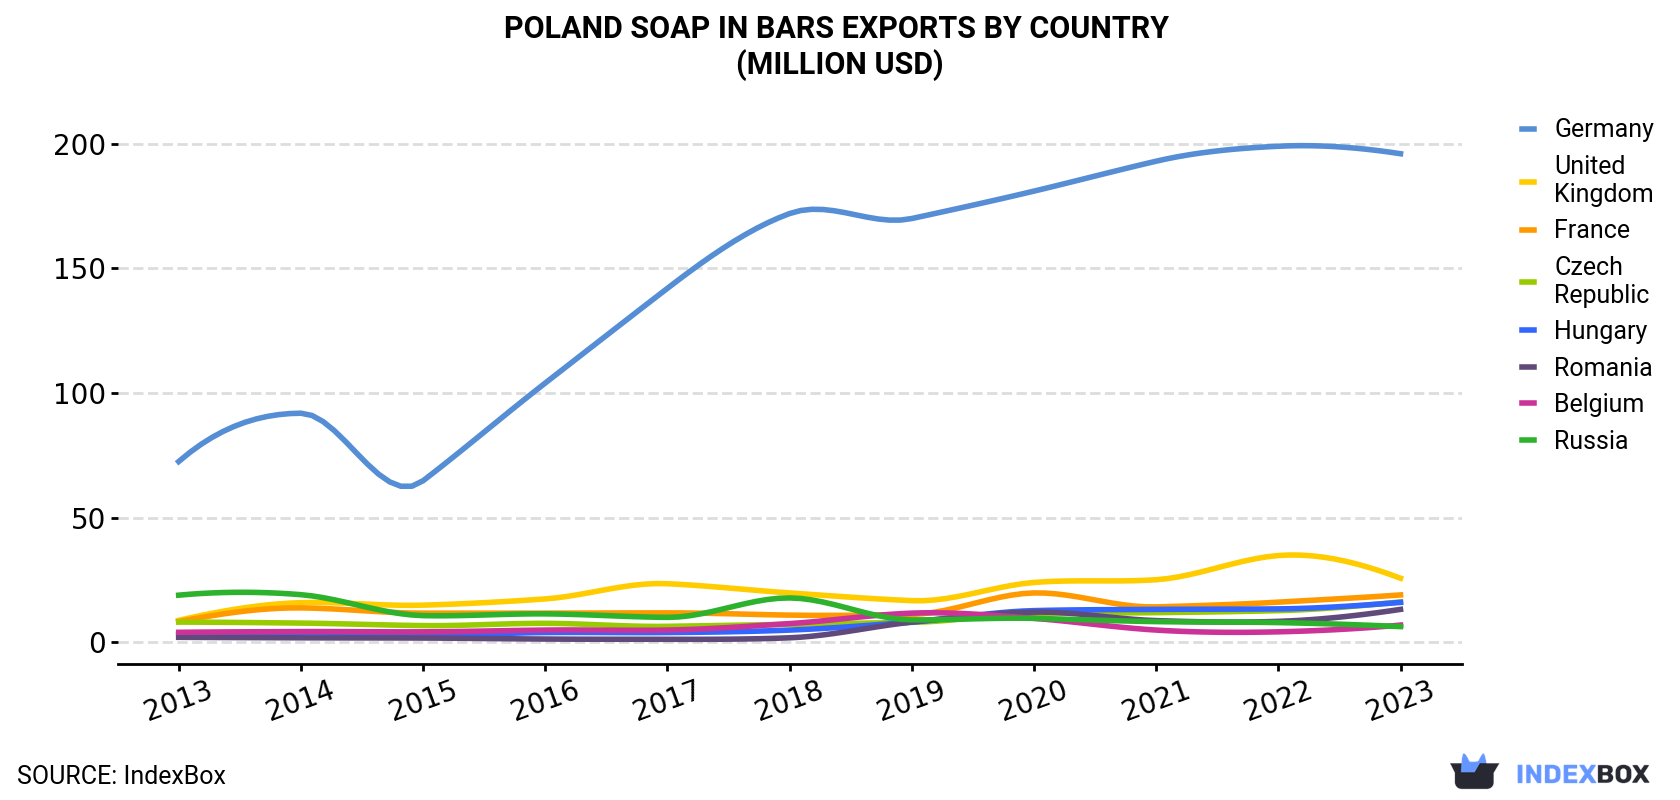 Poland Soap In Bars Exports By Country (Million USD)